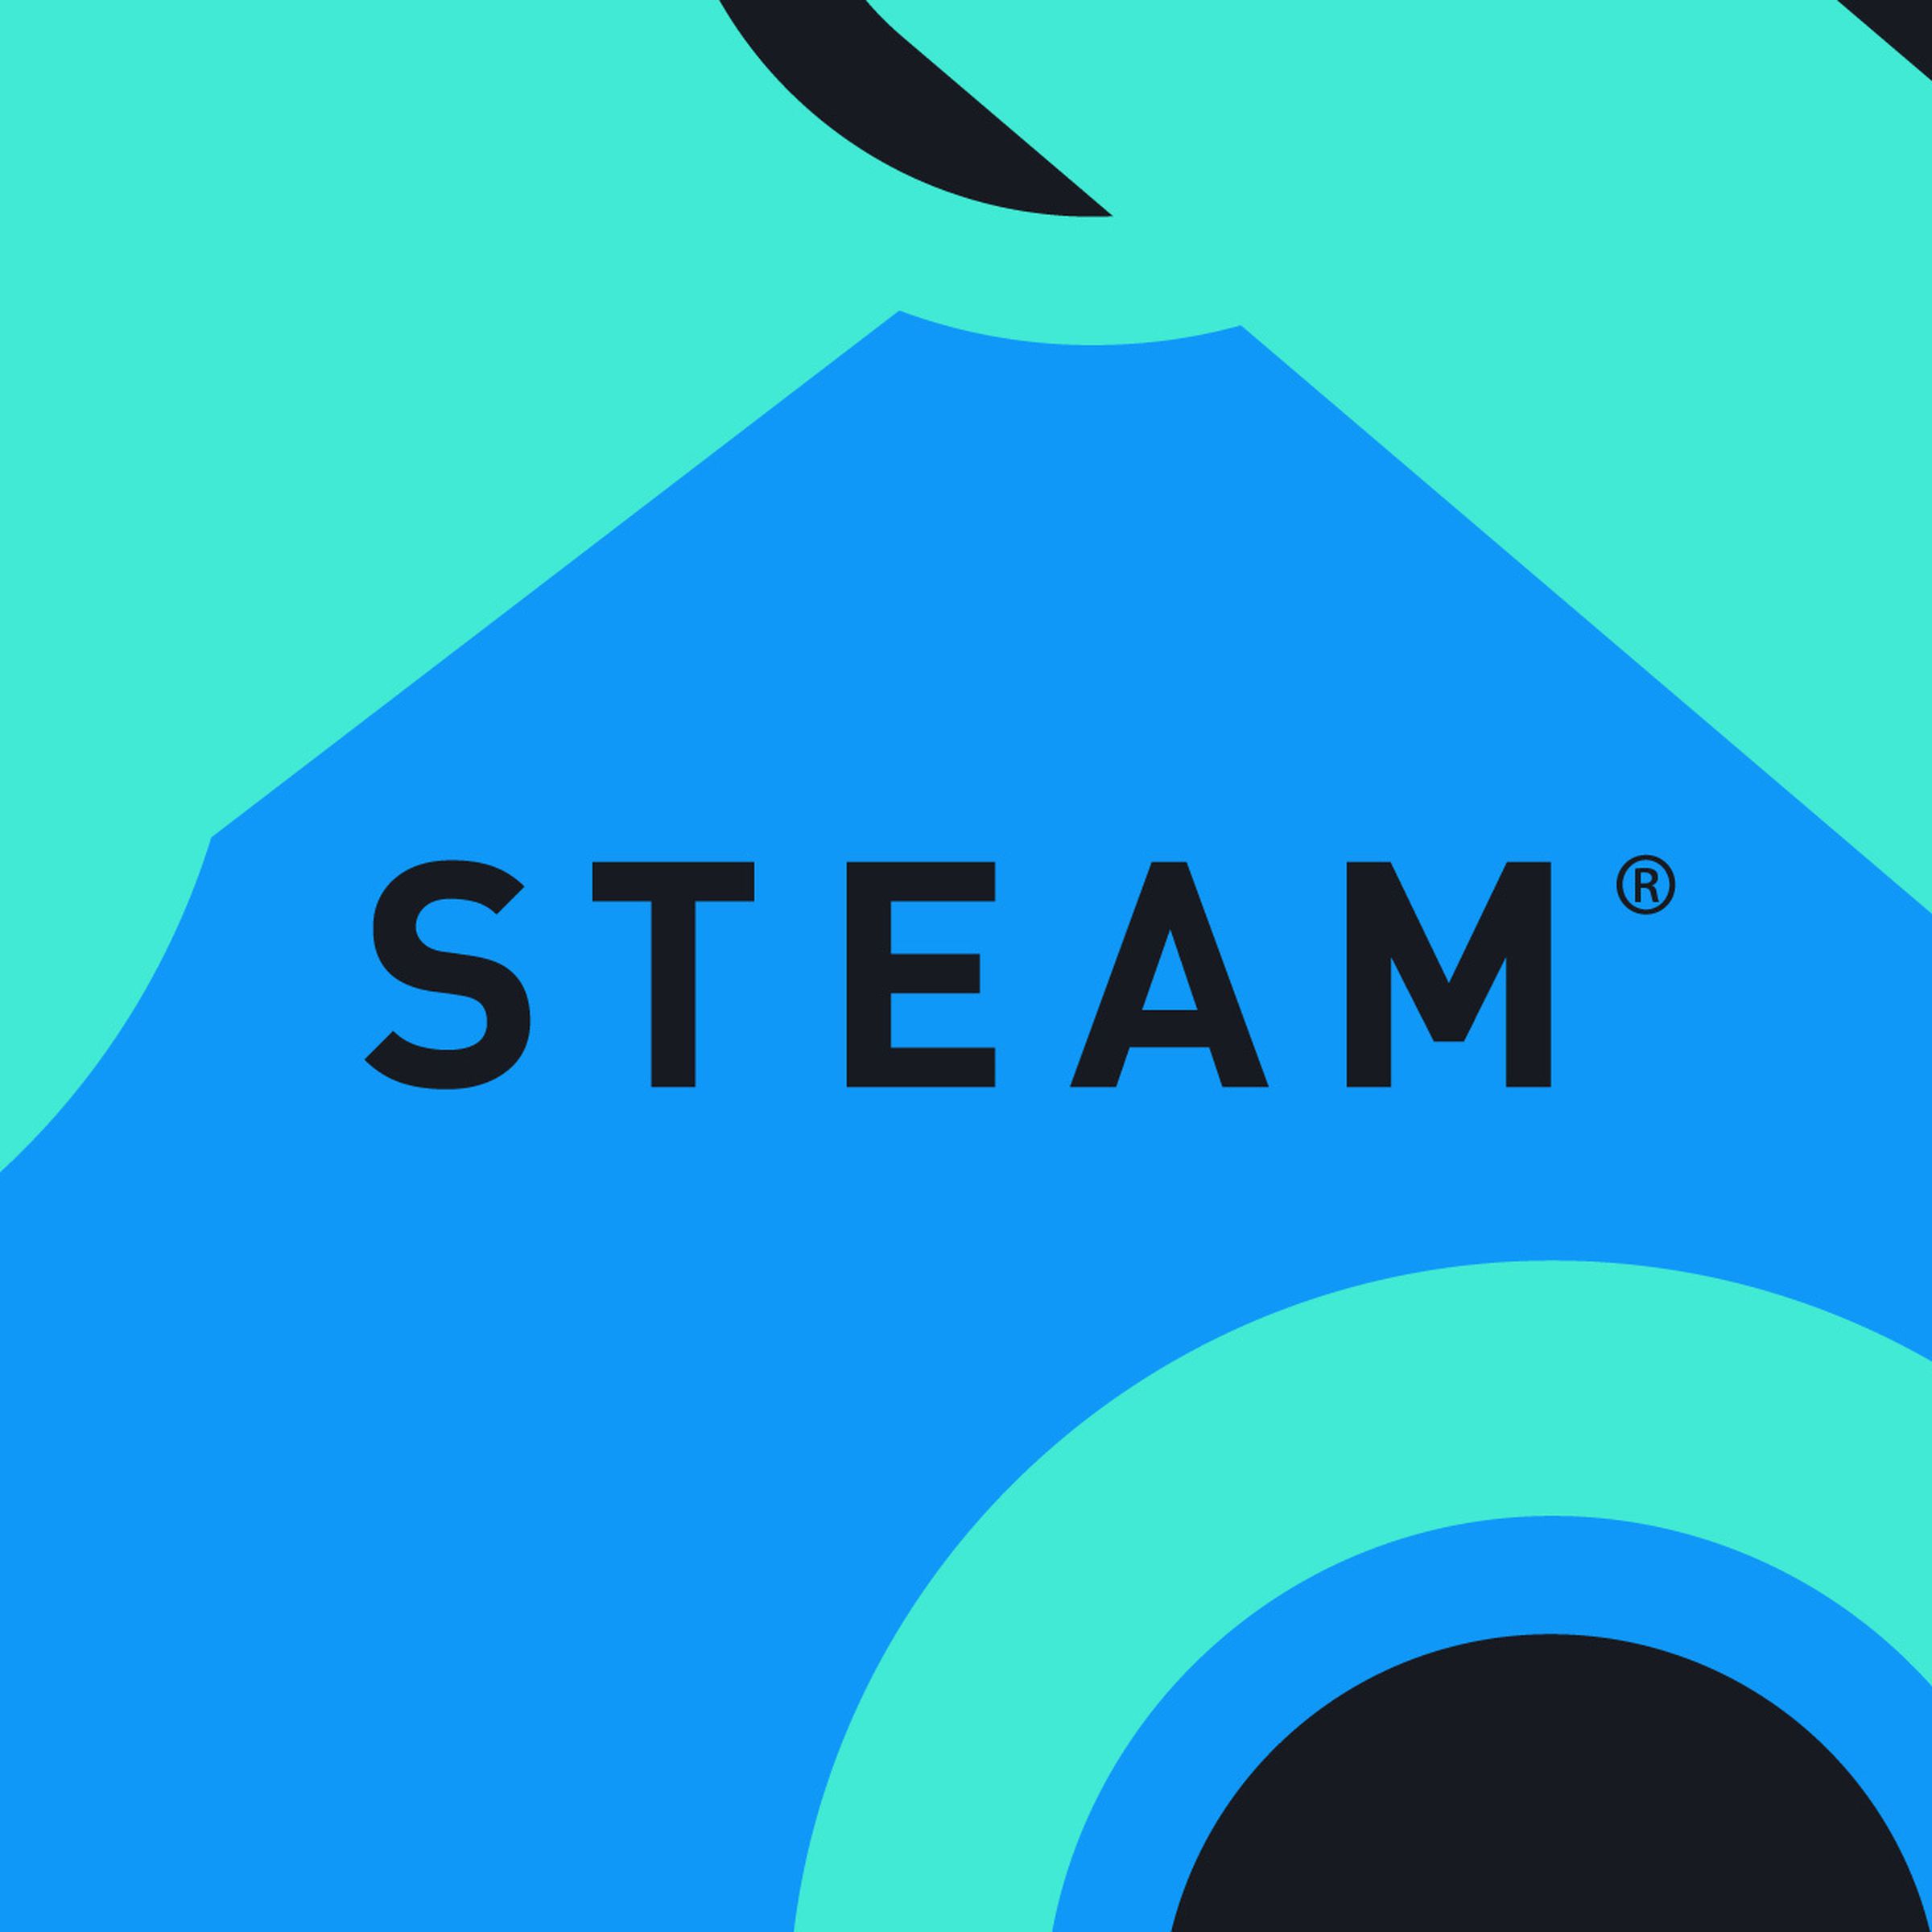 The Steam brand logo against a blue and black backdrop